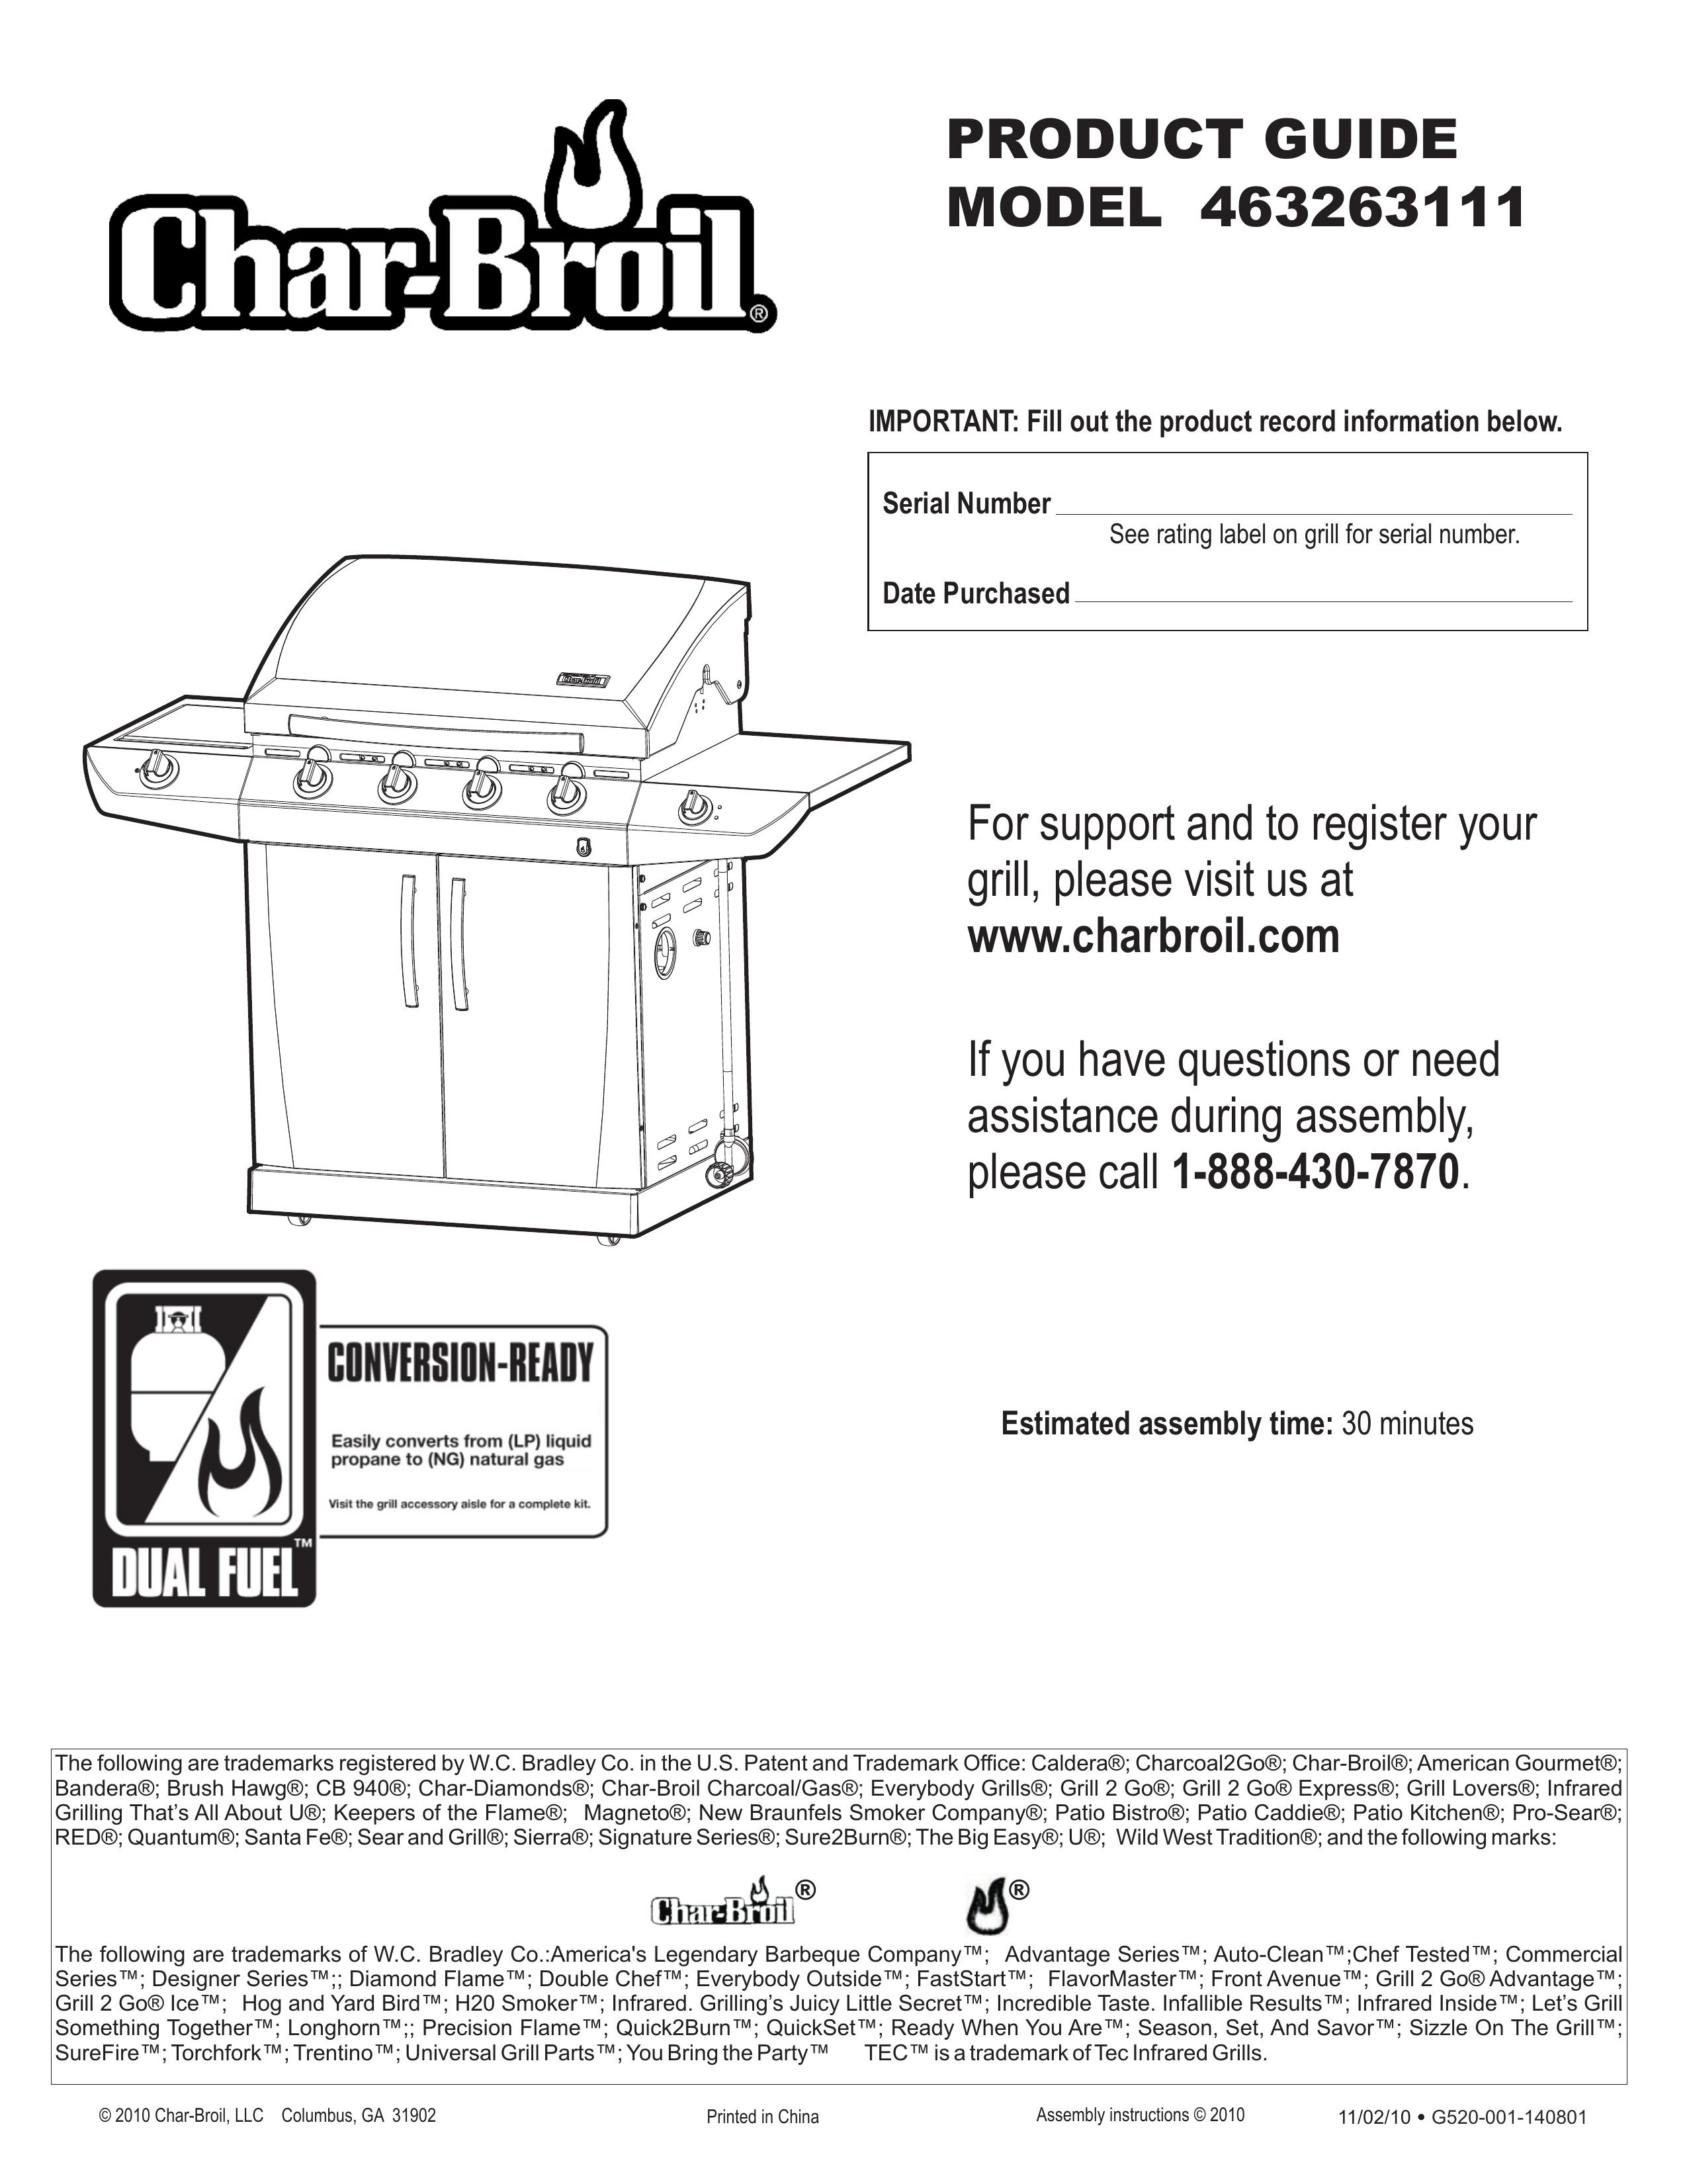 Char-Broil 463263111 Gas Grill User Manual